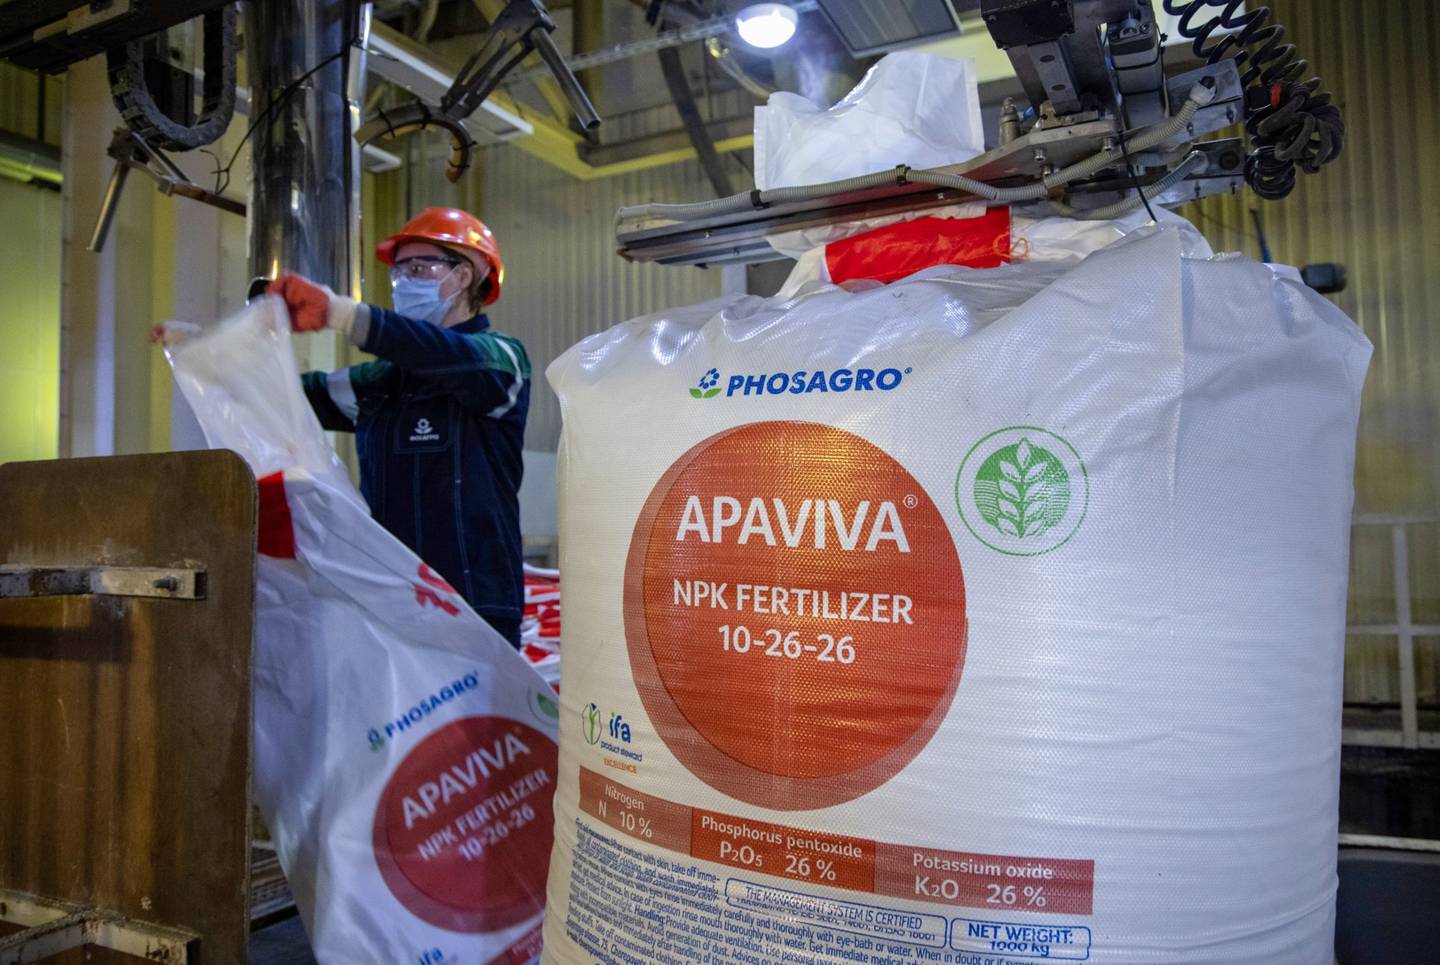 A worker operates a machine to fill sacks of Apaviva NPK(S) phosphate fertilizer at the PhosAgro-Cherepovets fertilizer plant, operated by PhosAgro PJSC, in Cherepovets, Russia, on Thursday, Dec. 2, 2021. Russia plans to impose a six-month quota on some fertilizer exports to safeguard local supplies and limit costs for farmers after the energy crisis sent nitrogen nutrient prices soaring. Photographer: Andrey Rudakov/Bloomberg